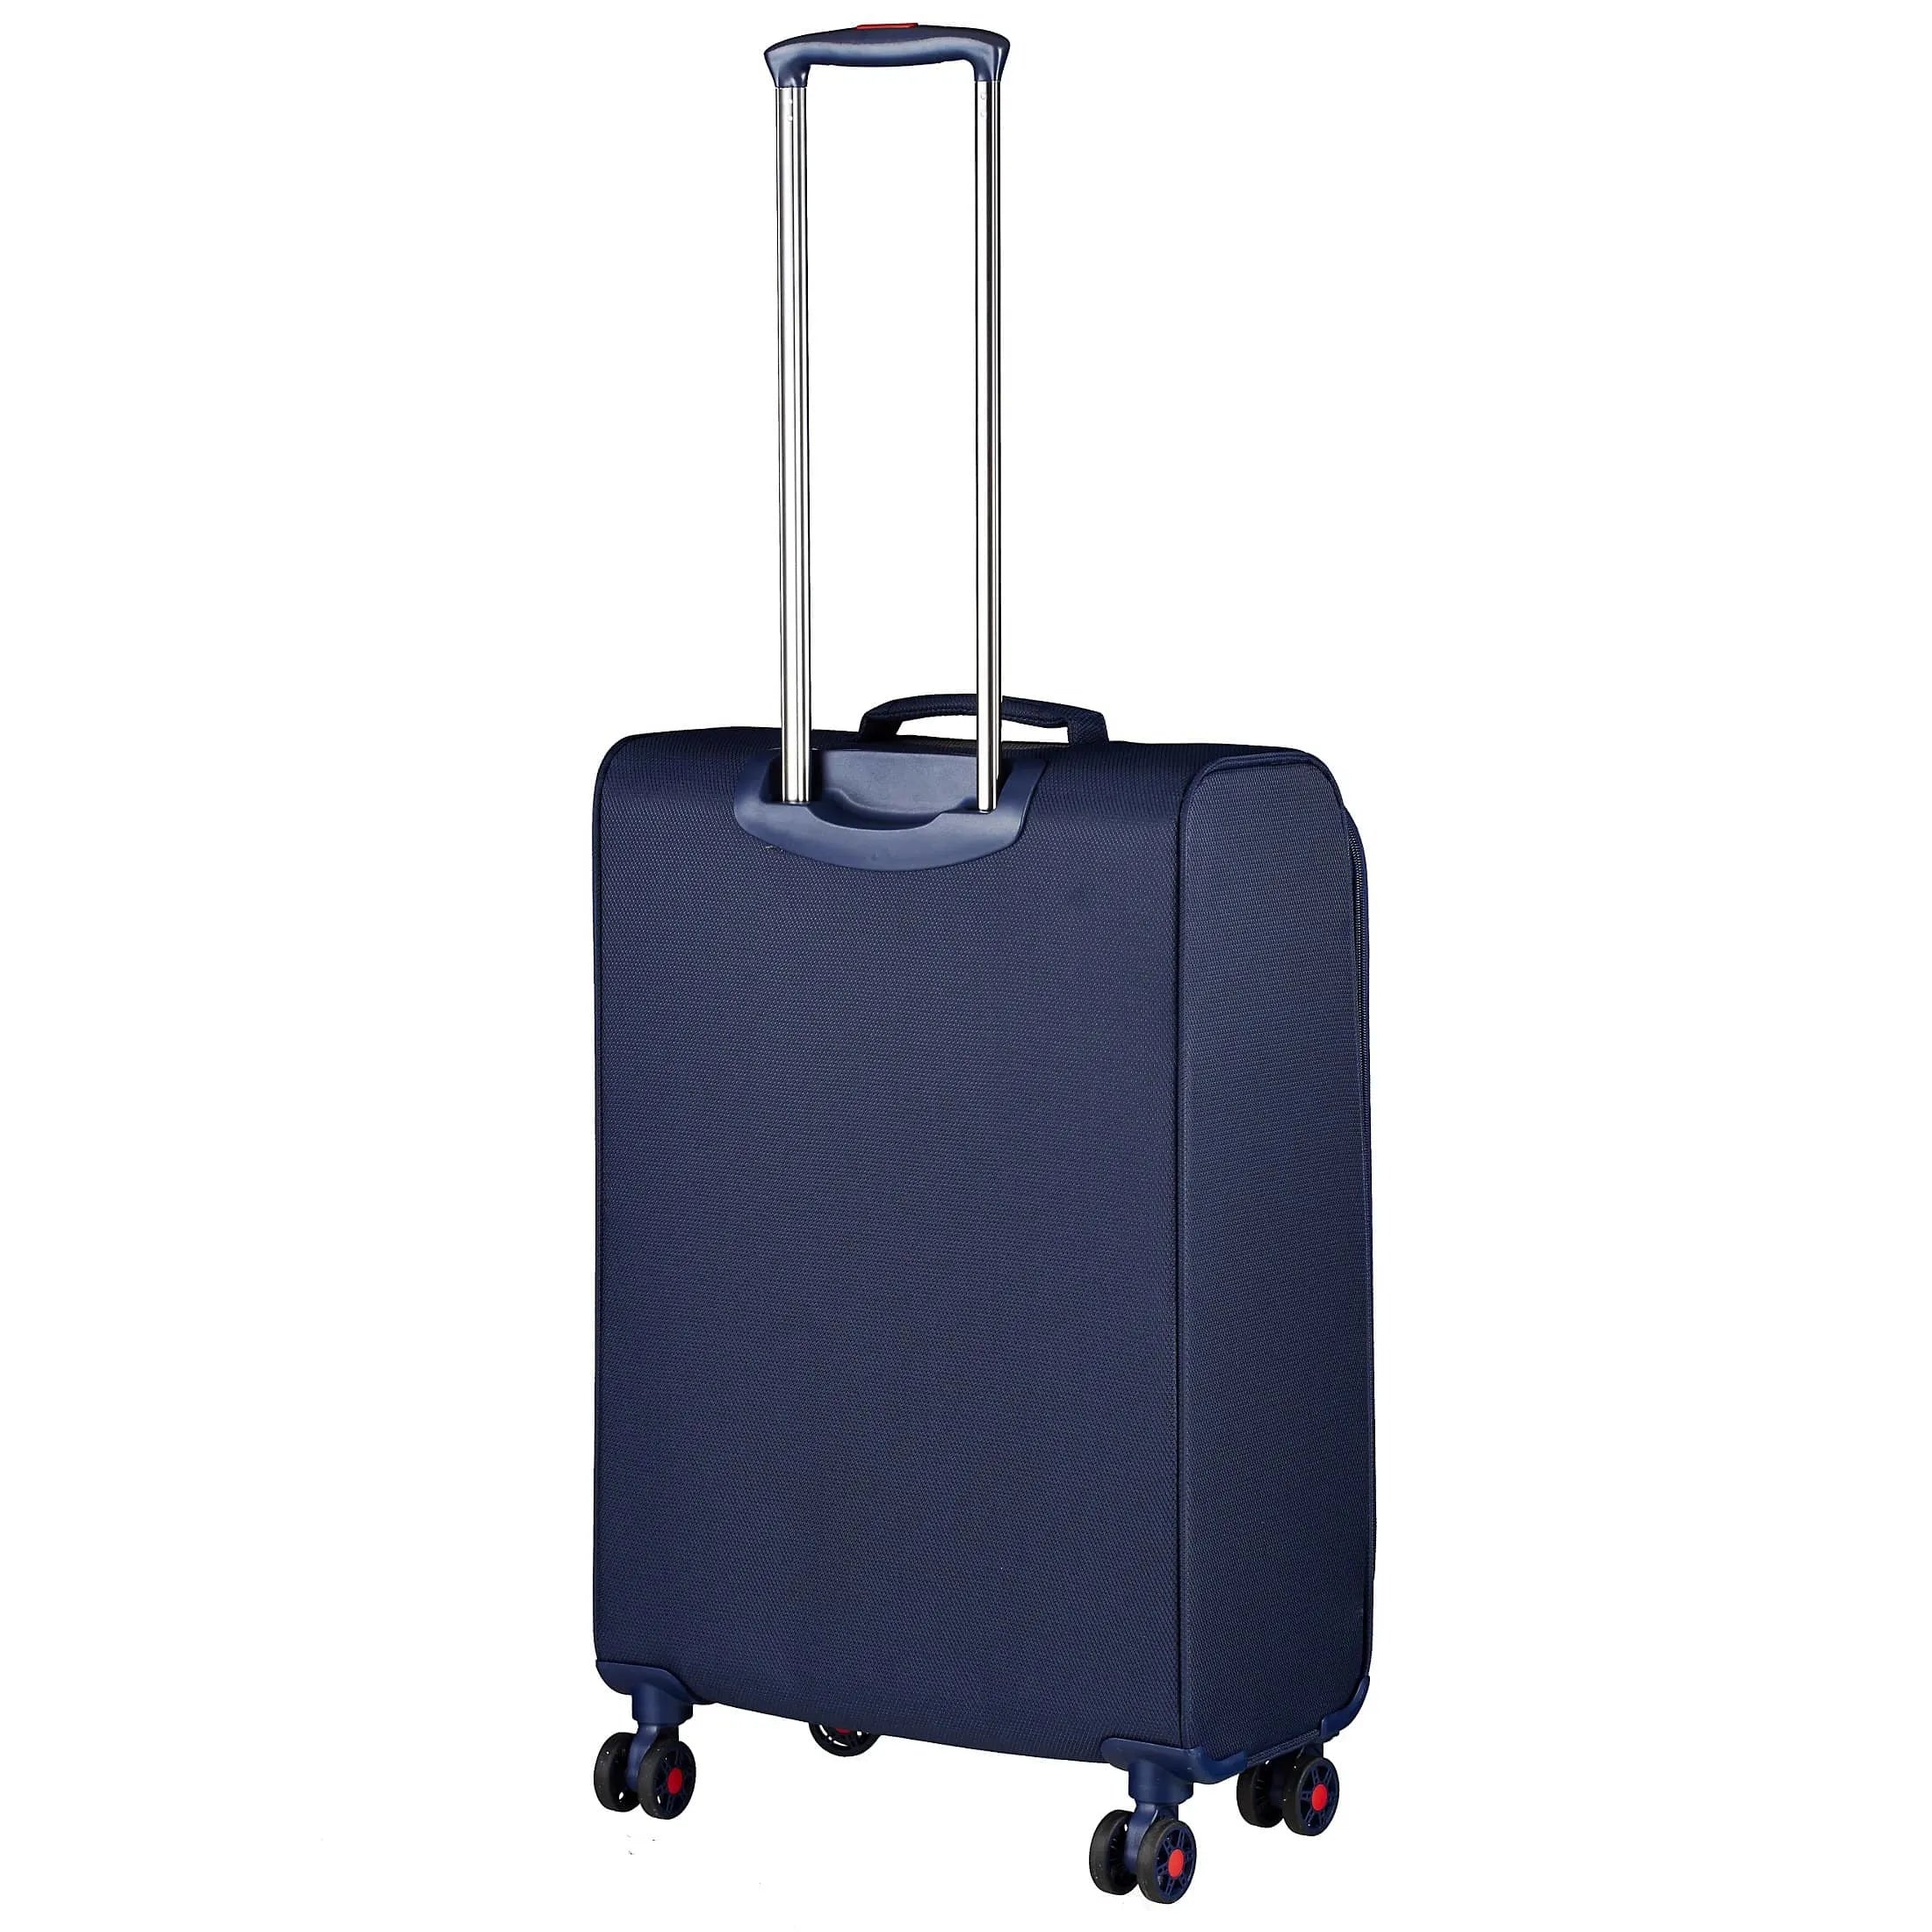 15 mars Trading Tourer trolley 4 roues 68 cm - cachemire